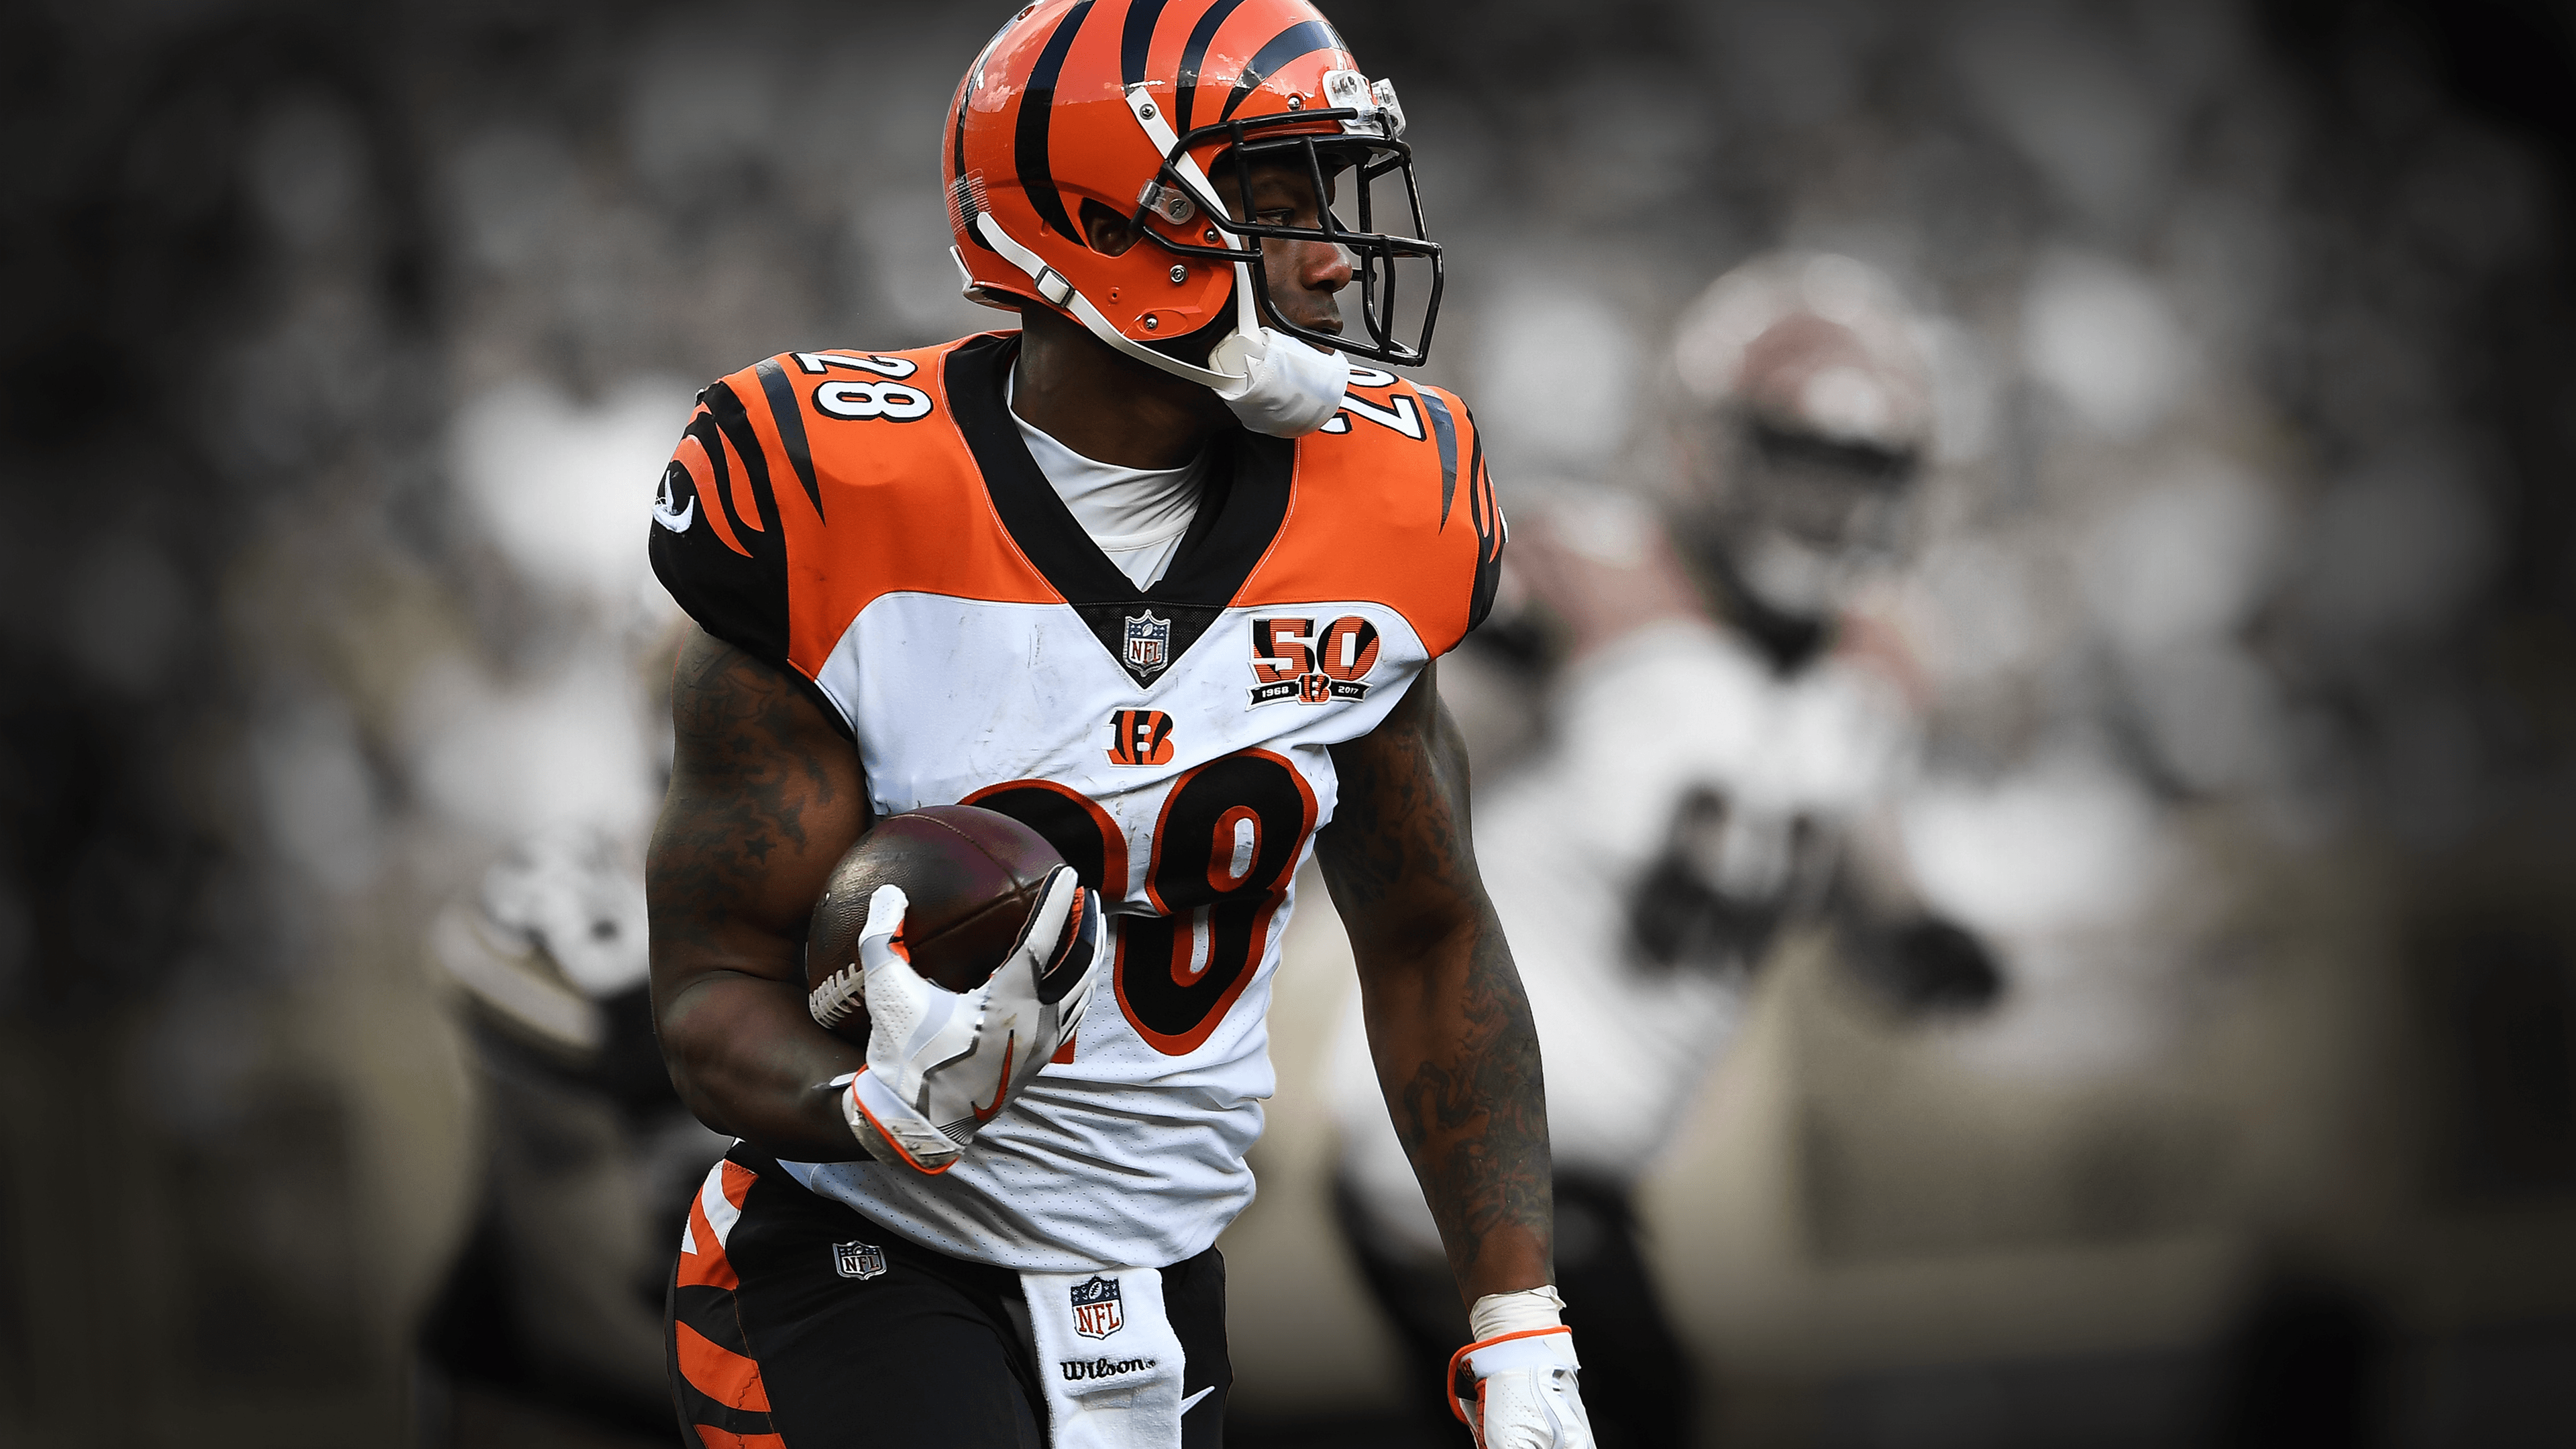 I made a new Joe Mixon desktop wallpaper. Let me know what you guys think! (Link to full, 4k wallpaper in comments.)